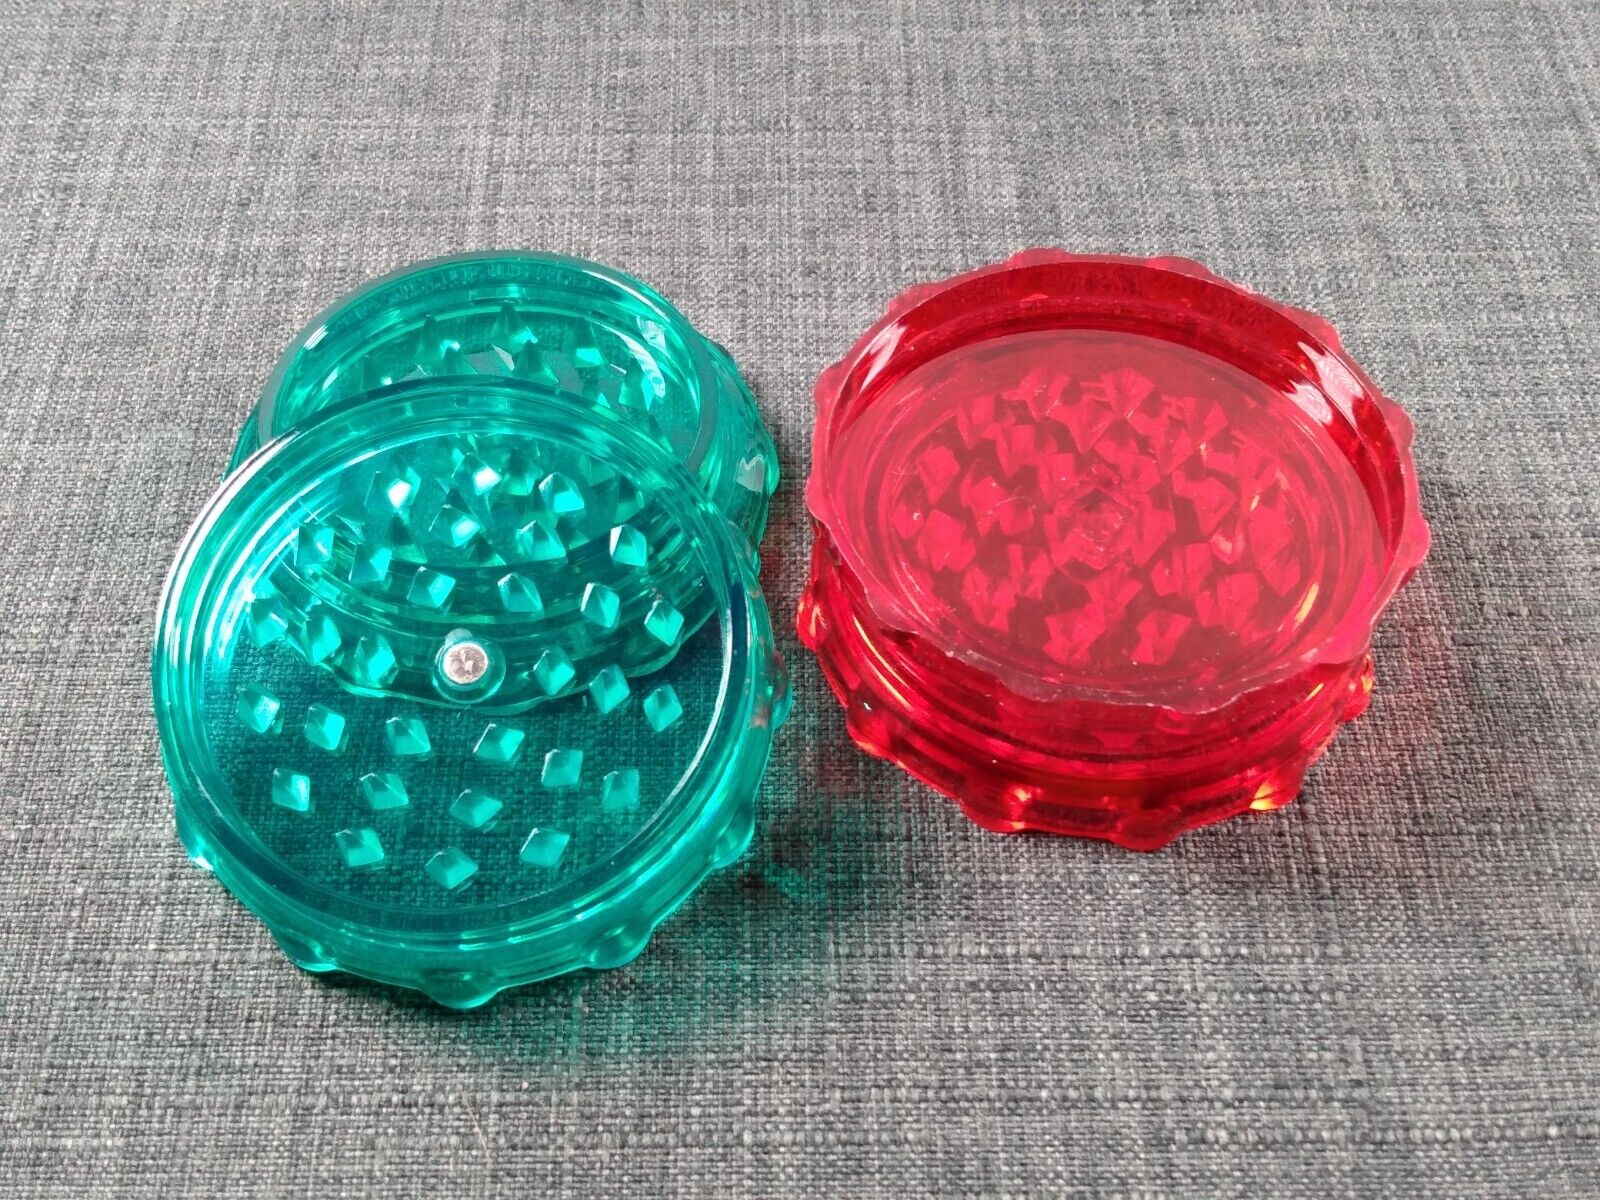 LARGE PLASTIC GRINDERS - 2-Piece - 3in. w/ Magnet (GREEN + RED) Lot of 2